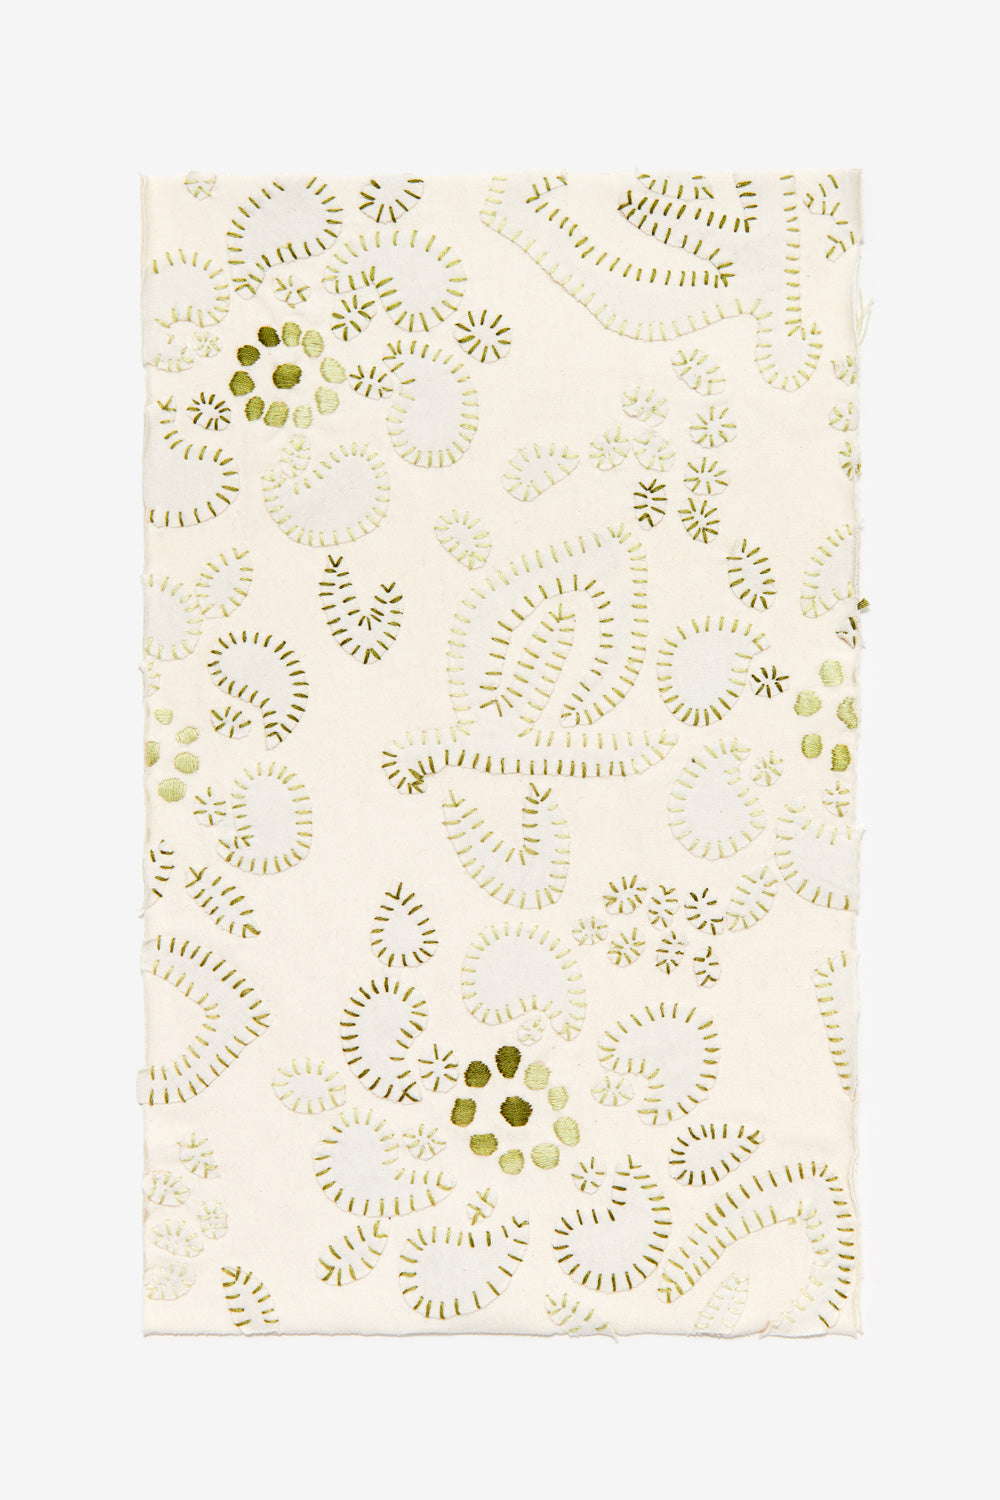 Swatch featuring Daisy appliqué in natural with green variegated embroidery.